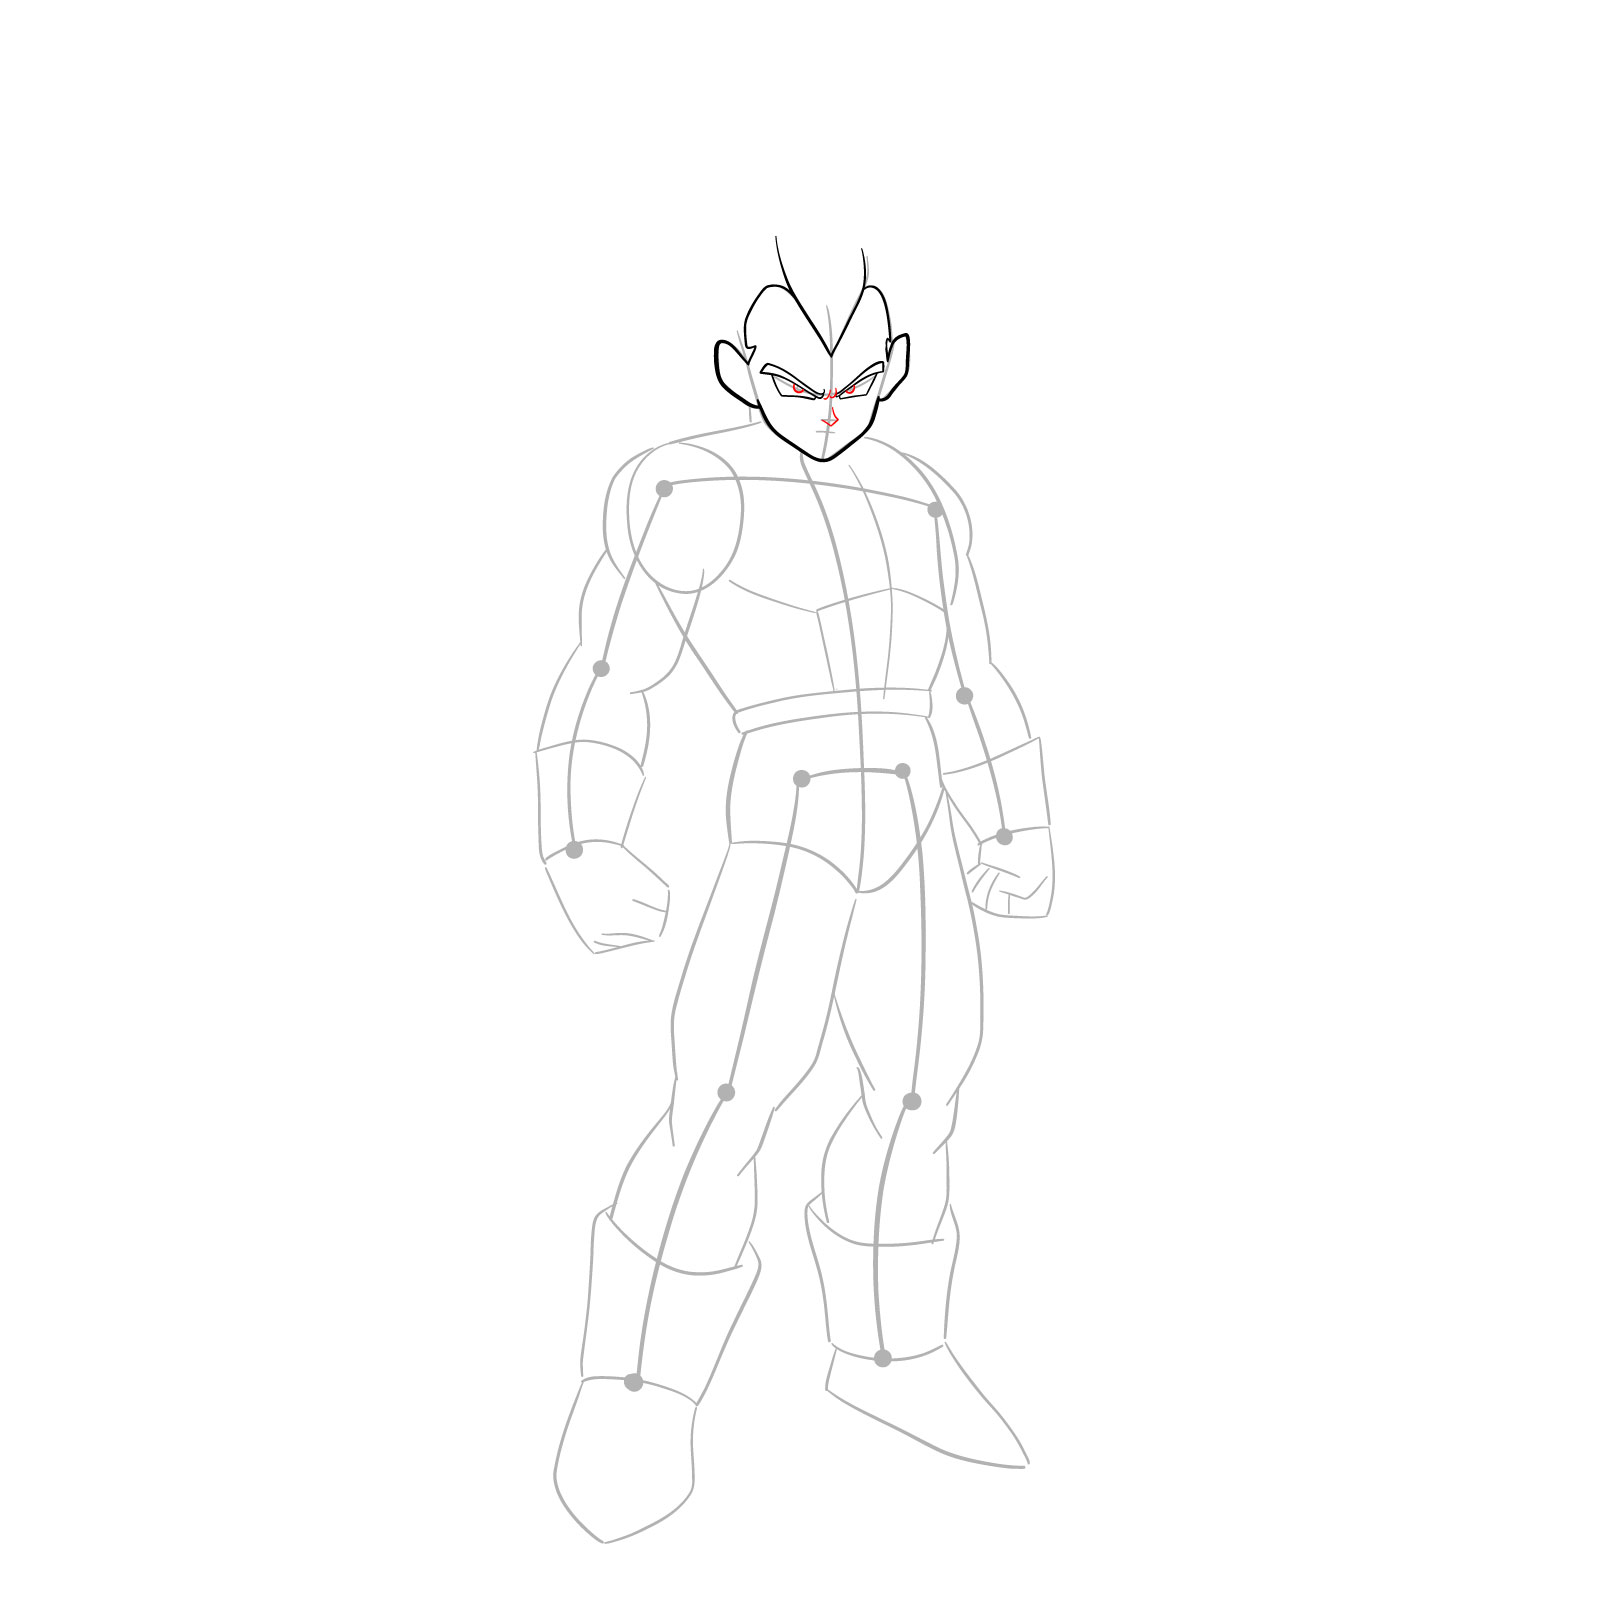 How to draw Vegeta in SSGSS - step 10